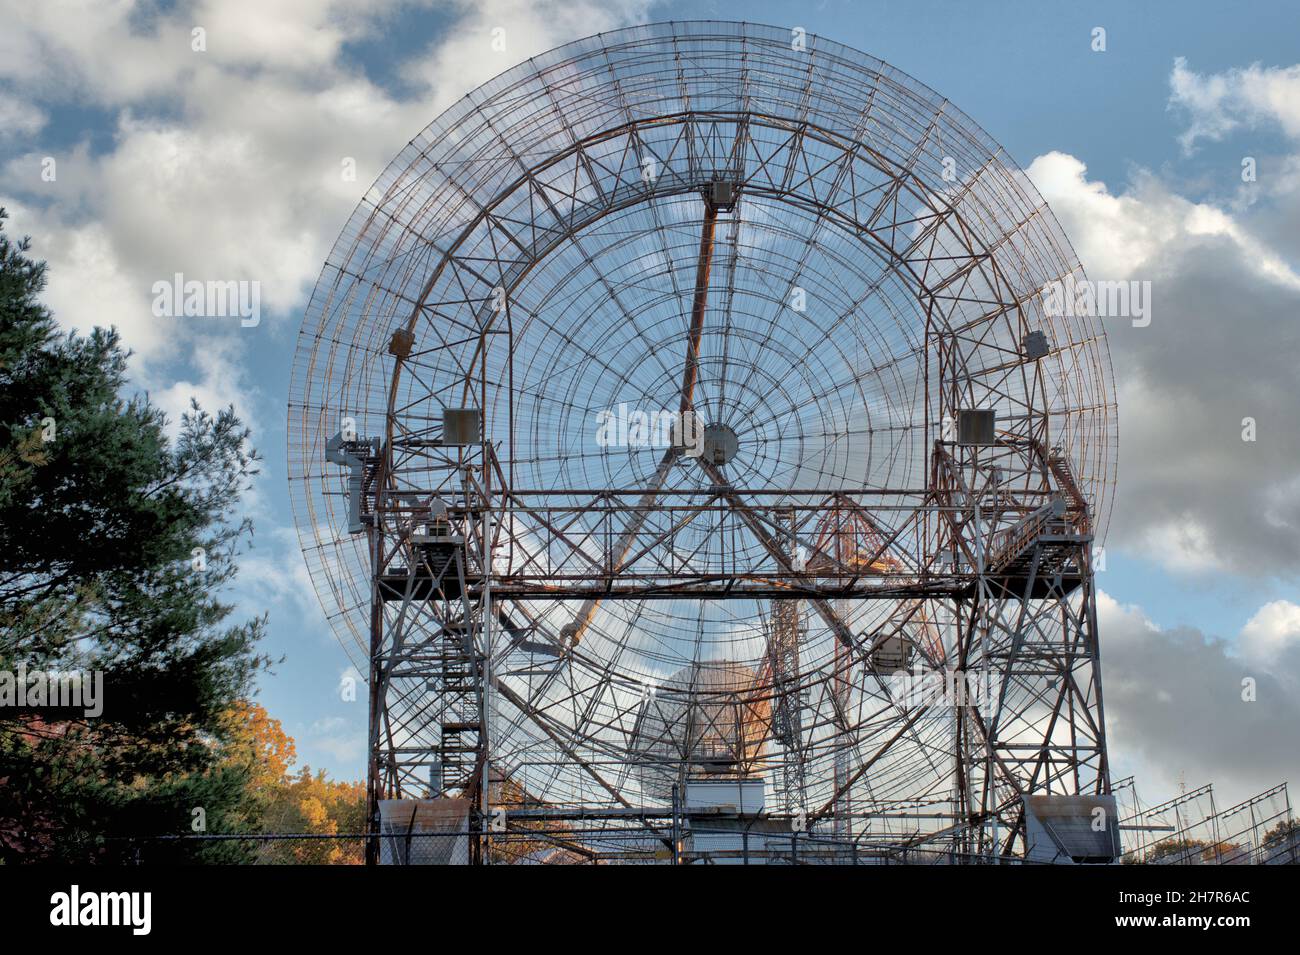 Steerable radar dish at MIT Haystack Observatory in Massachusetts. Radio telescope is used to study how solar radiation affects the ionosphere. Stock Photo